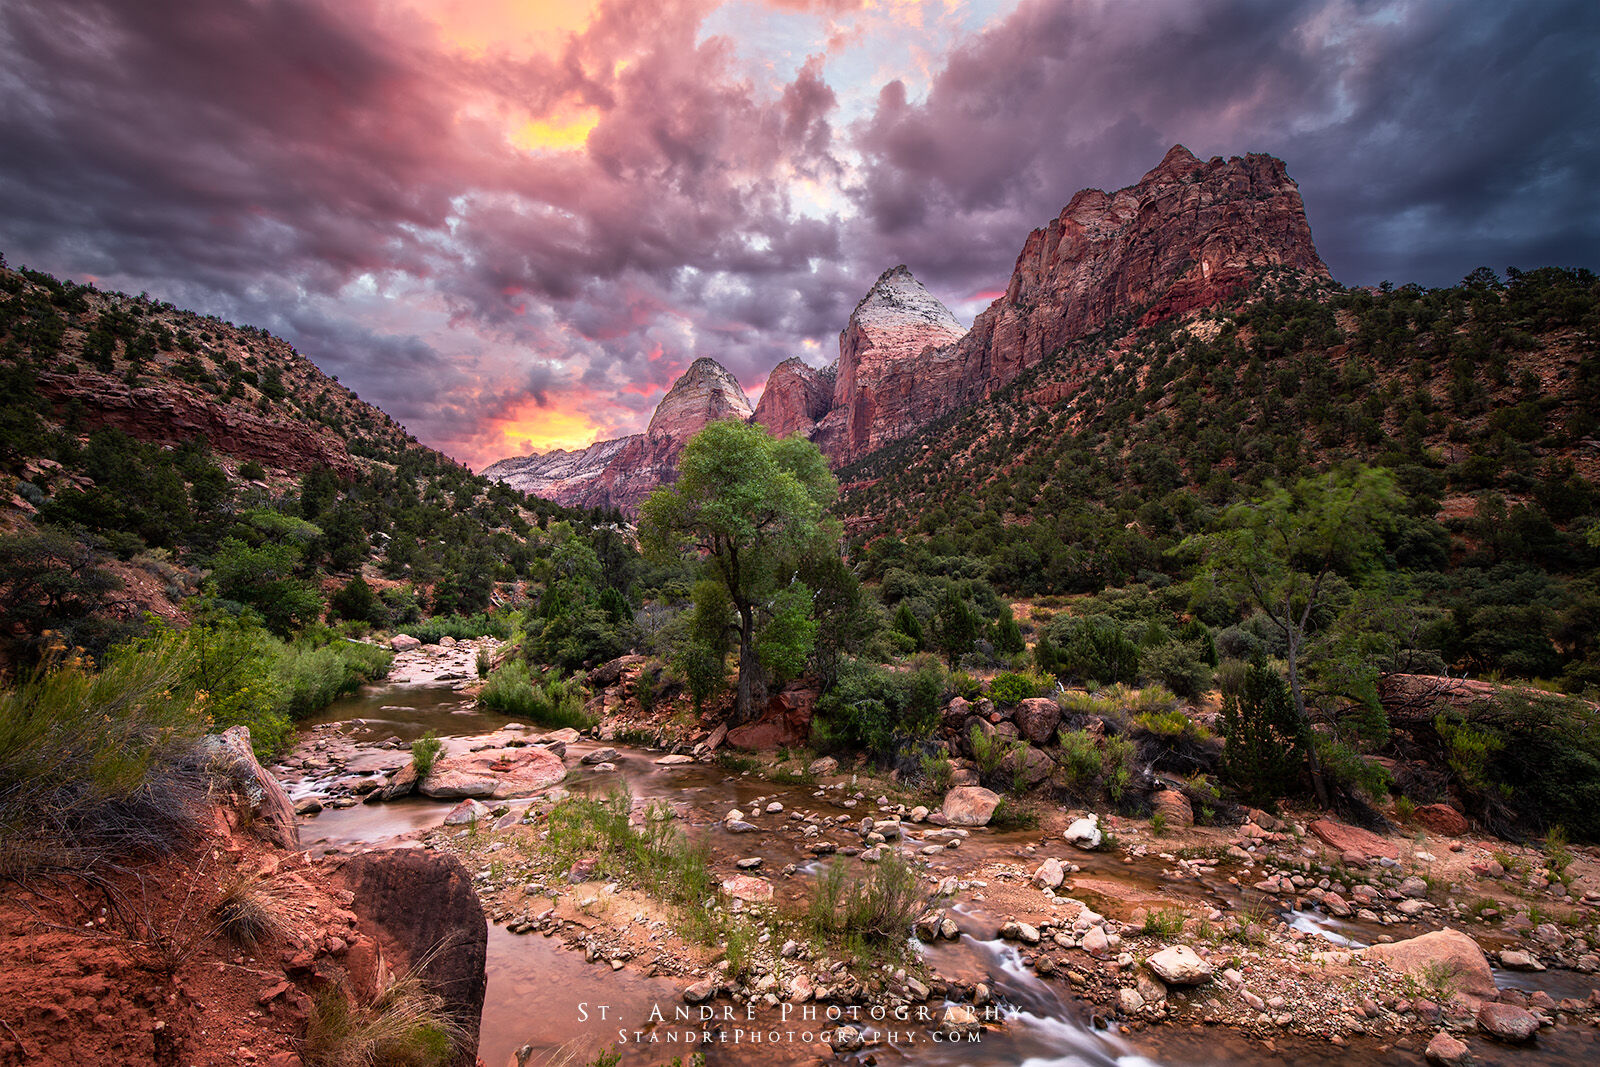 Dramatic peaks in Zion national Park with a monsoon storm brewing. Peaks highlighted are the two brothers, Temple of the Sun and the east temple in Zion. 